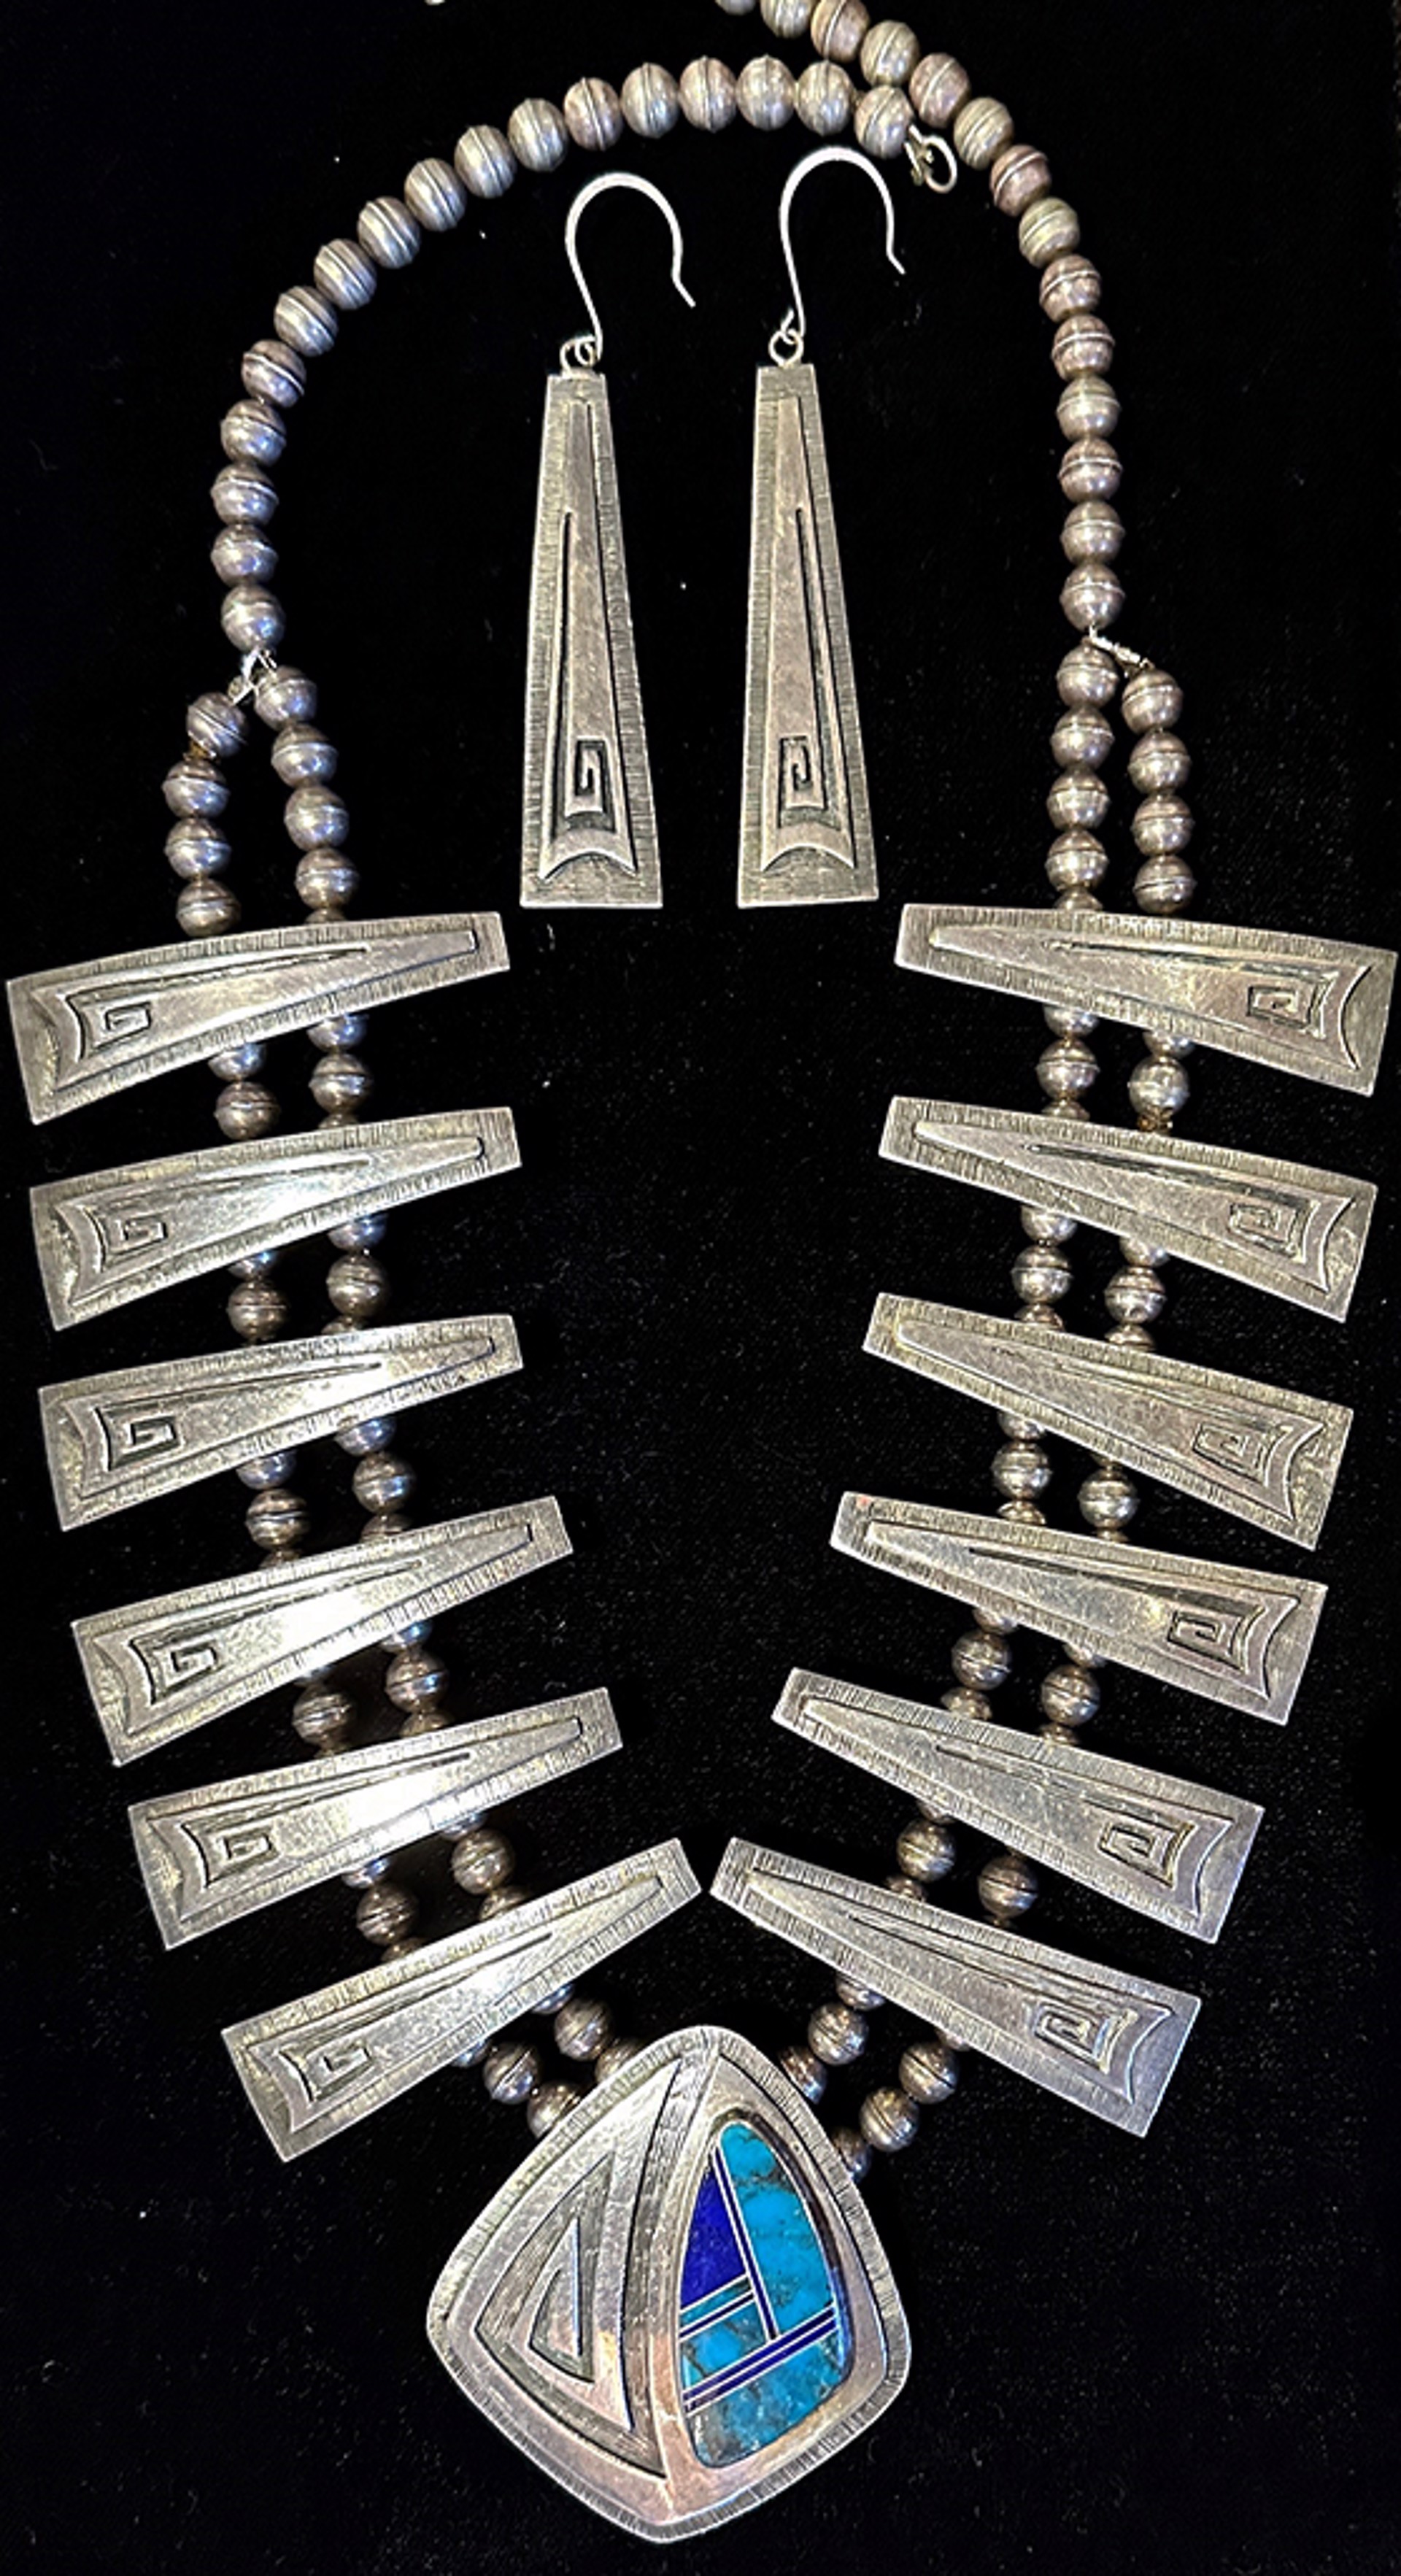 Vintage 1970s Hopi Squash Blossom Necklace and Earrings Set